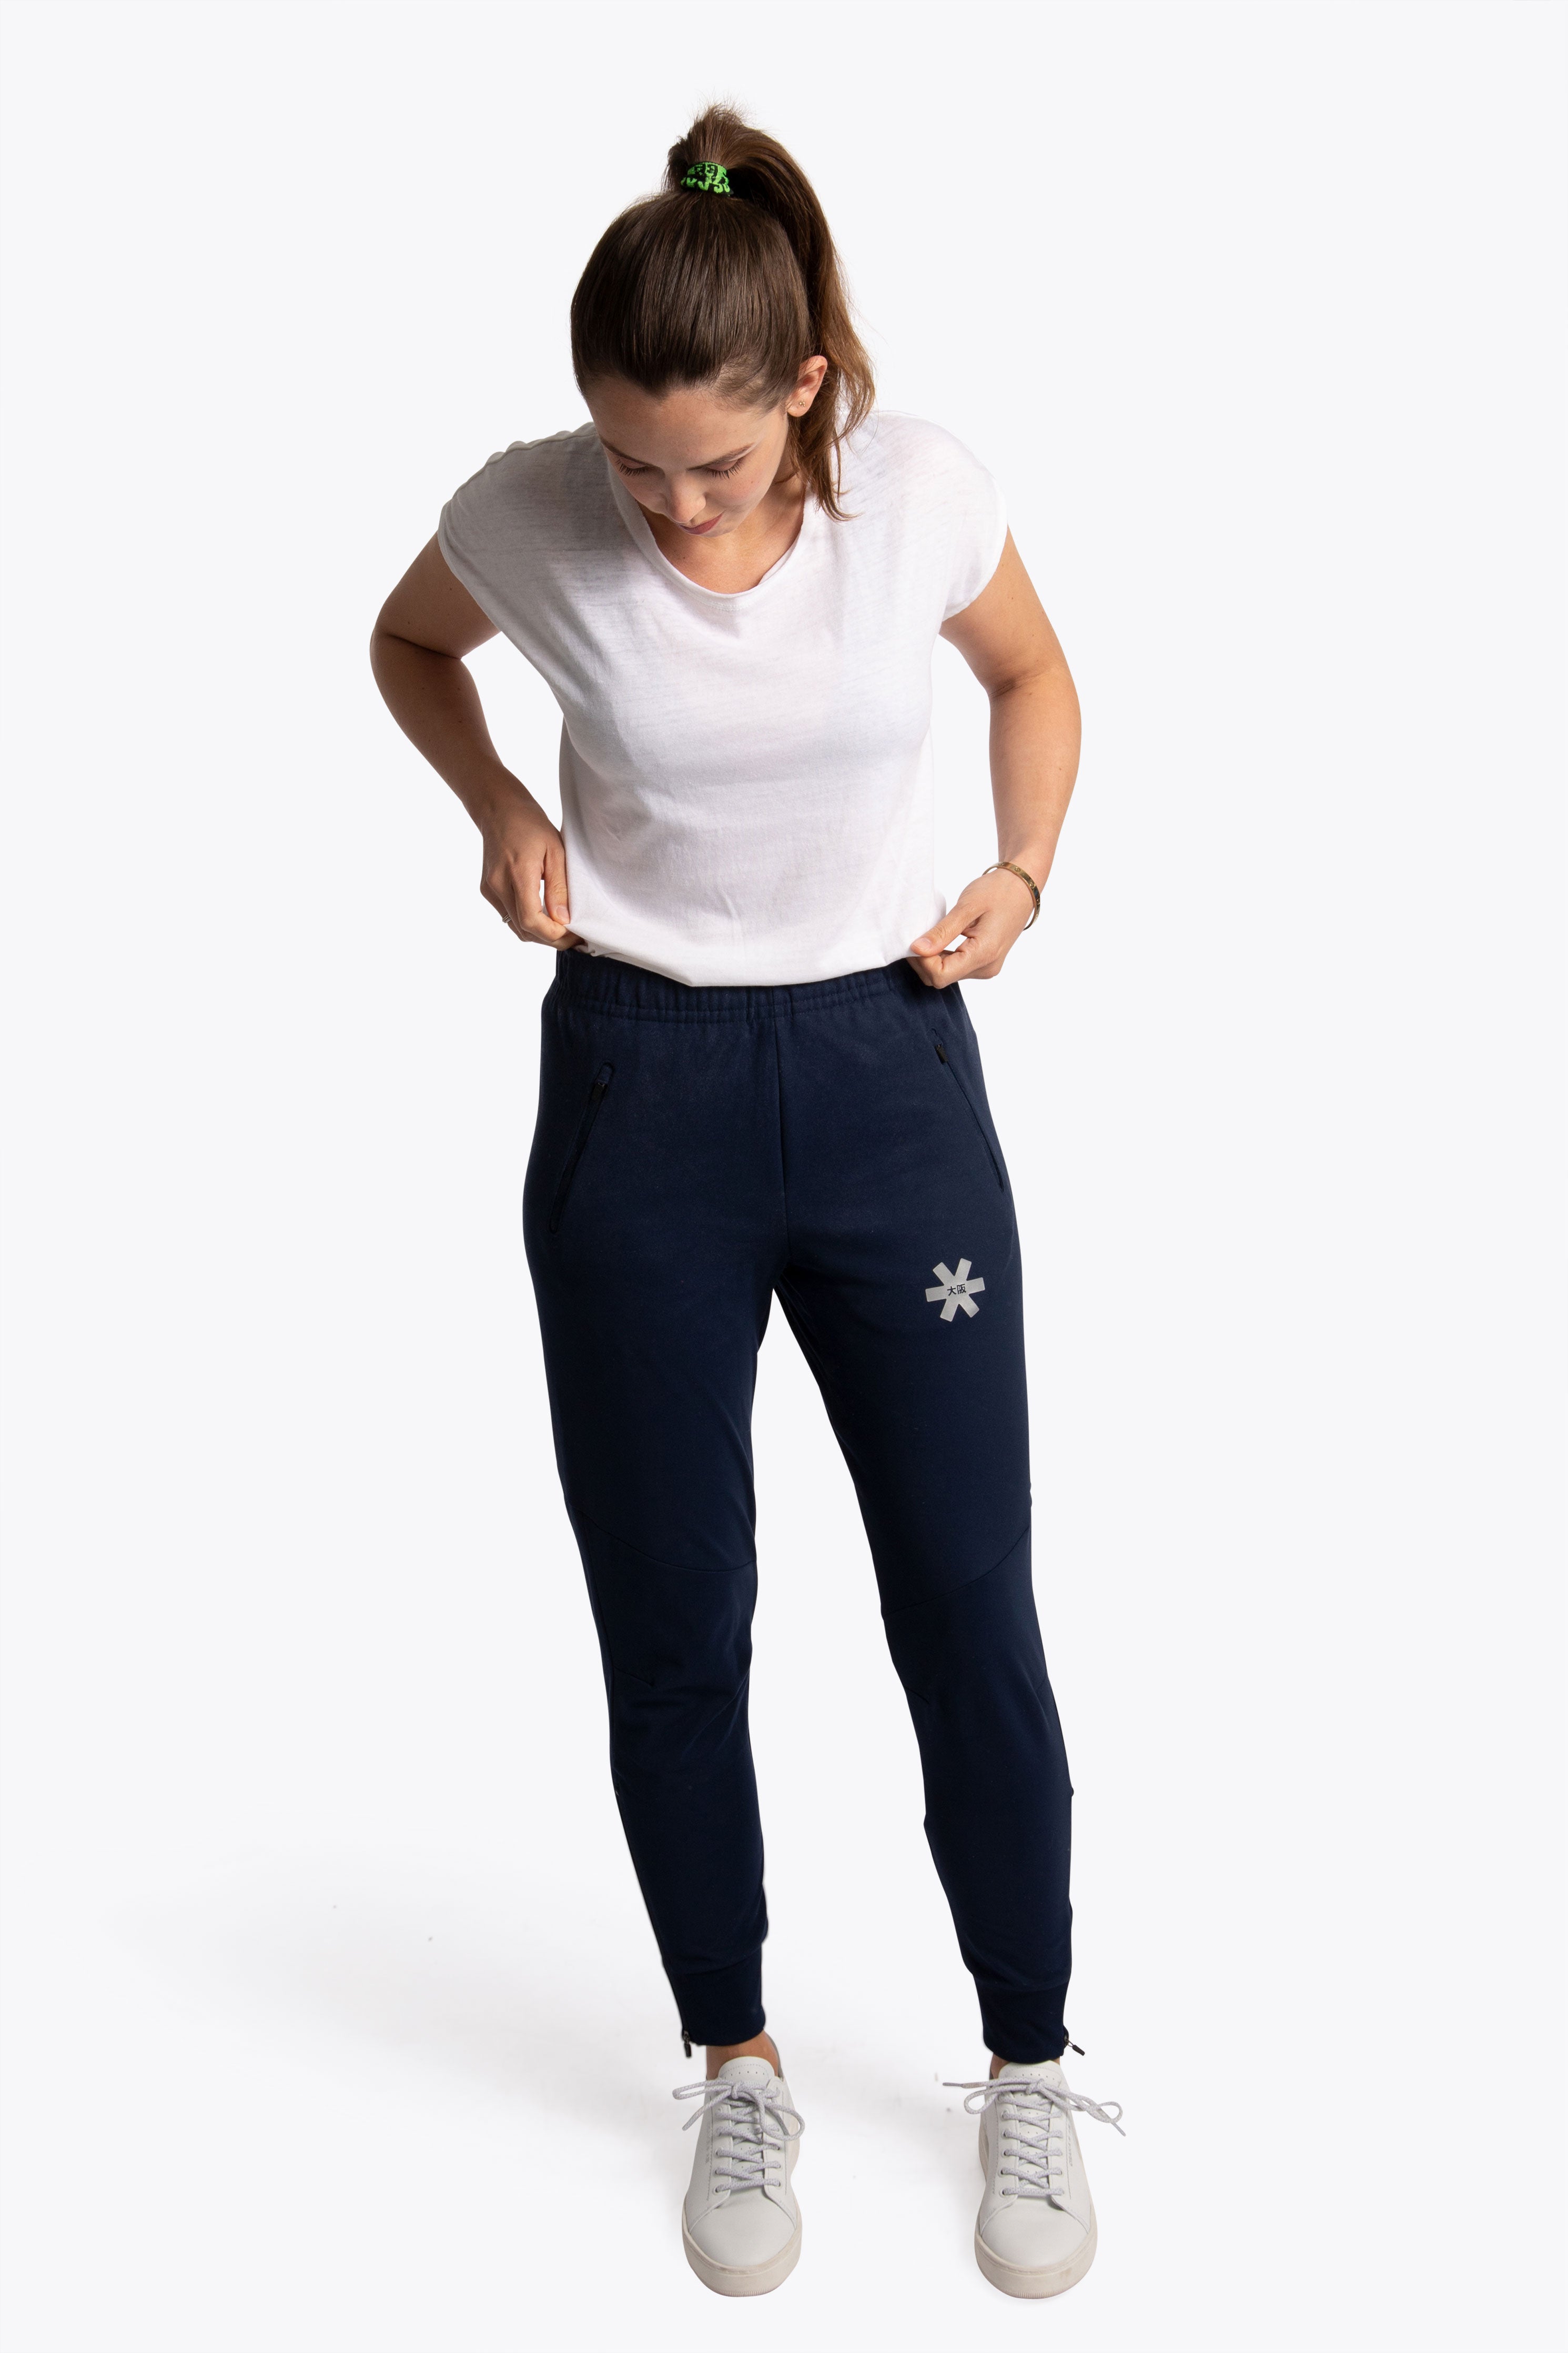 FANCY STRETCHABLE WOMEN TRACK PANT 101